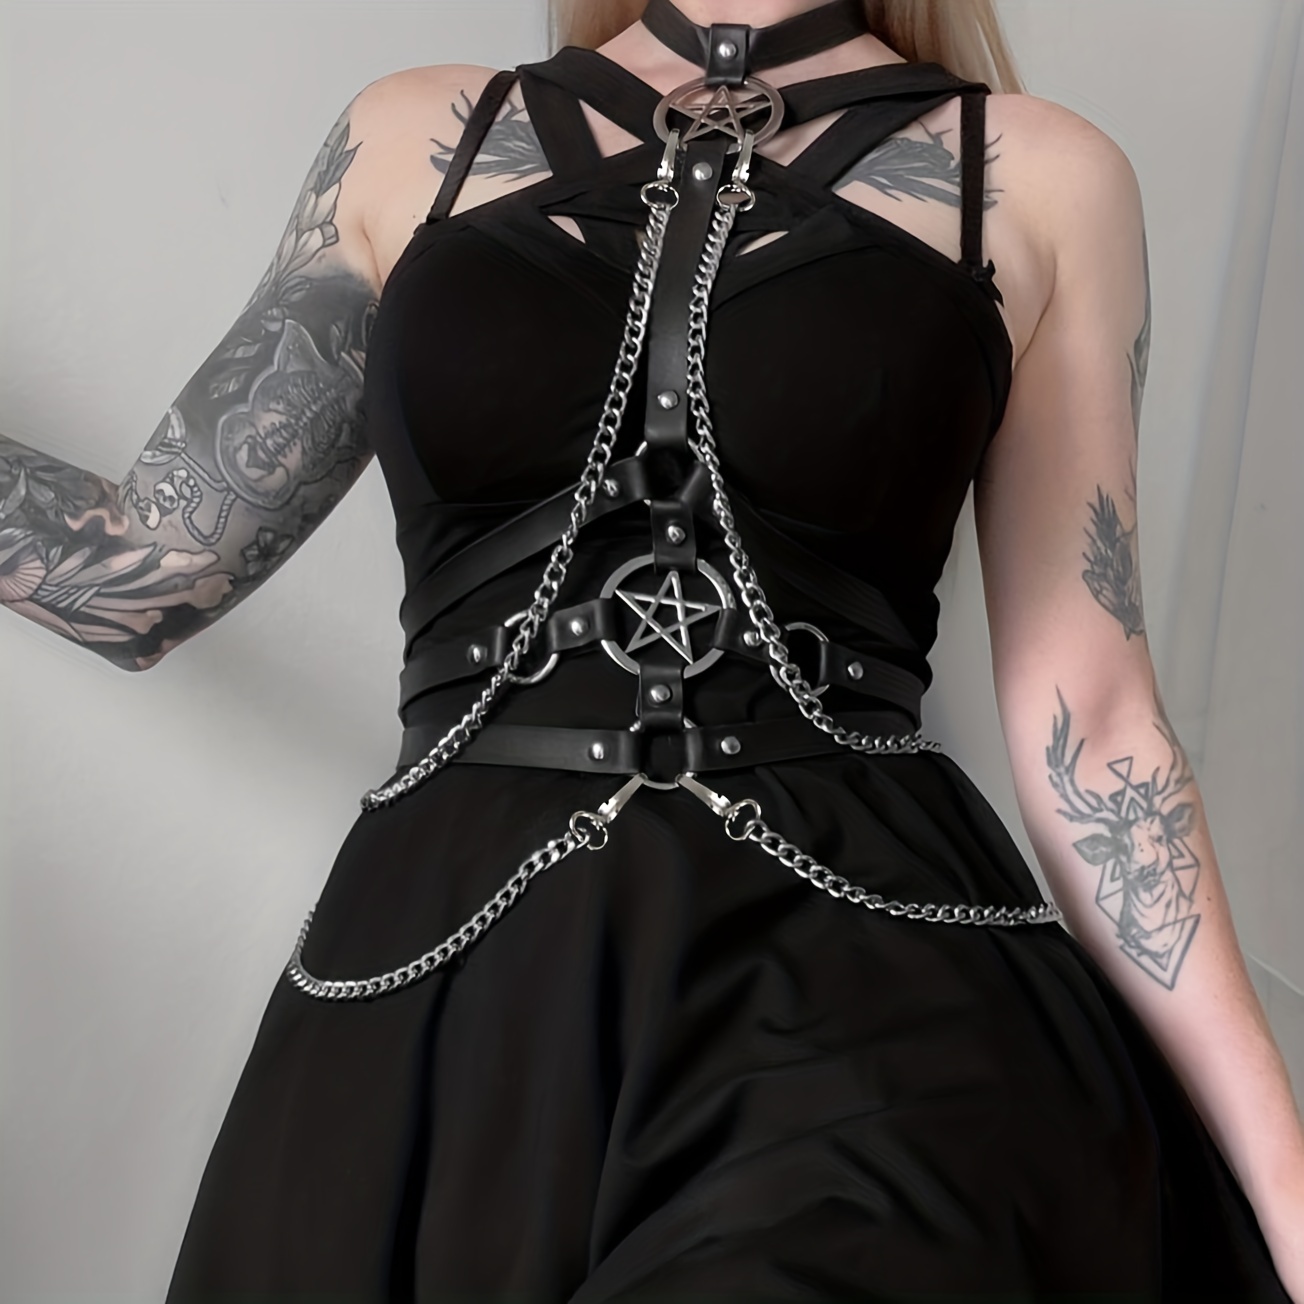 Sexy Pentagram Harness Bra Black Elastic Strappy Crop Top Cage Bra Goth  Fetish Witchy Star Harness Lingerie Rave Bdsm Body Harness Cage Bra